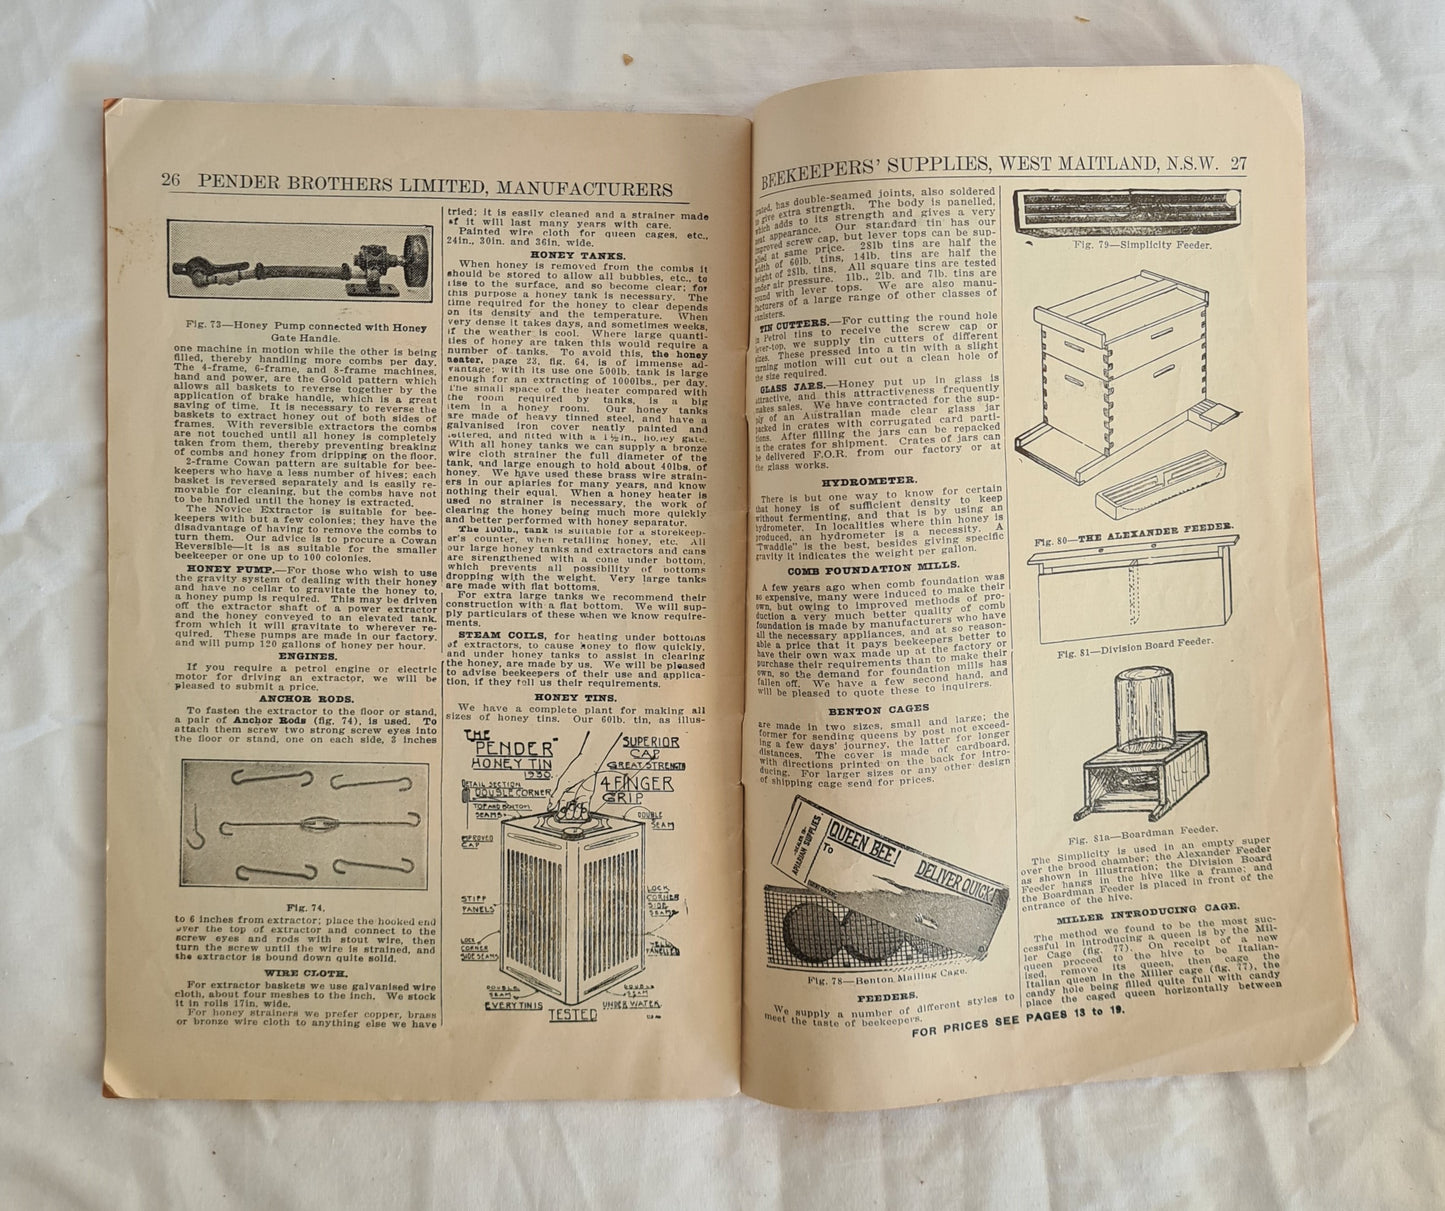 41st Edition Illustrated Catalogue of Beekeepers Supplies, &c. by Pender Bros.